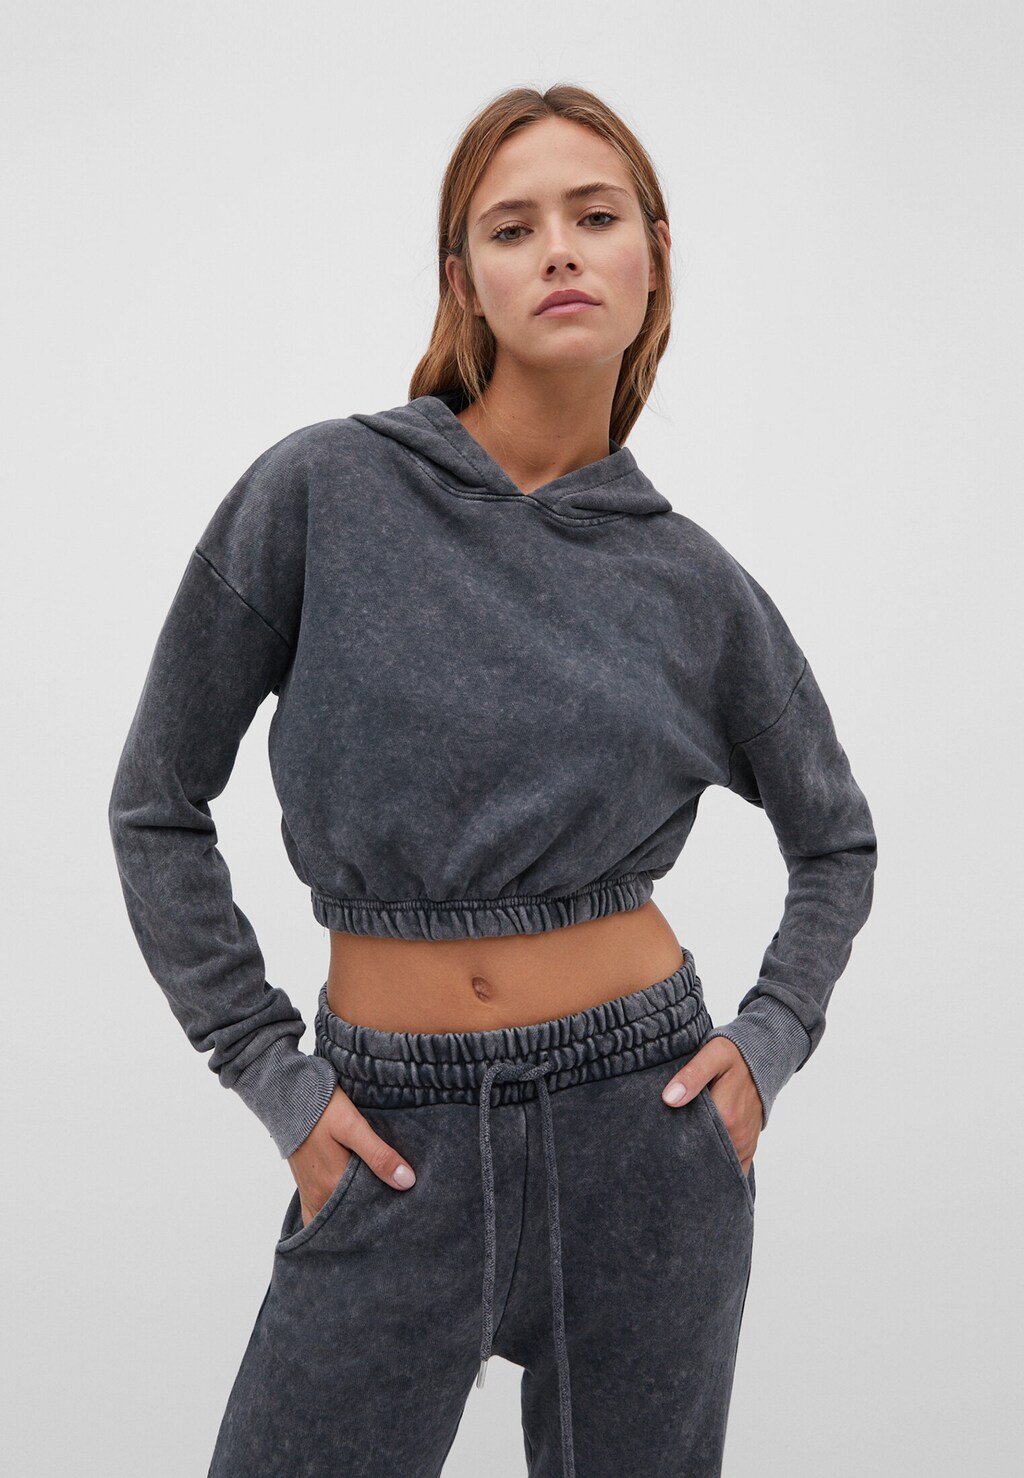 Seamless cut-out crop top - Women's fashion | Stradivarius United States